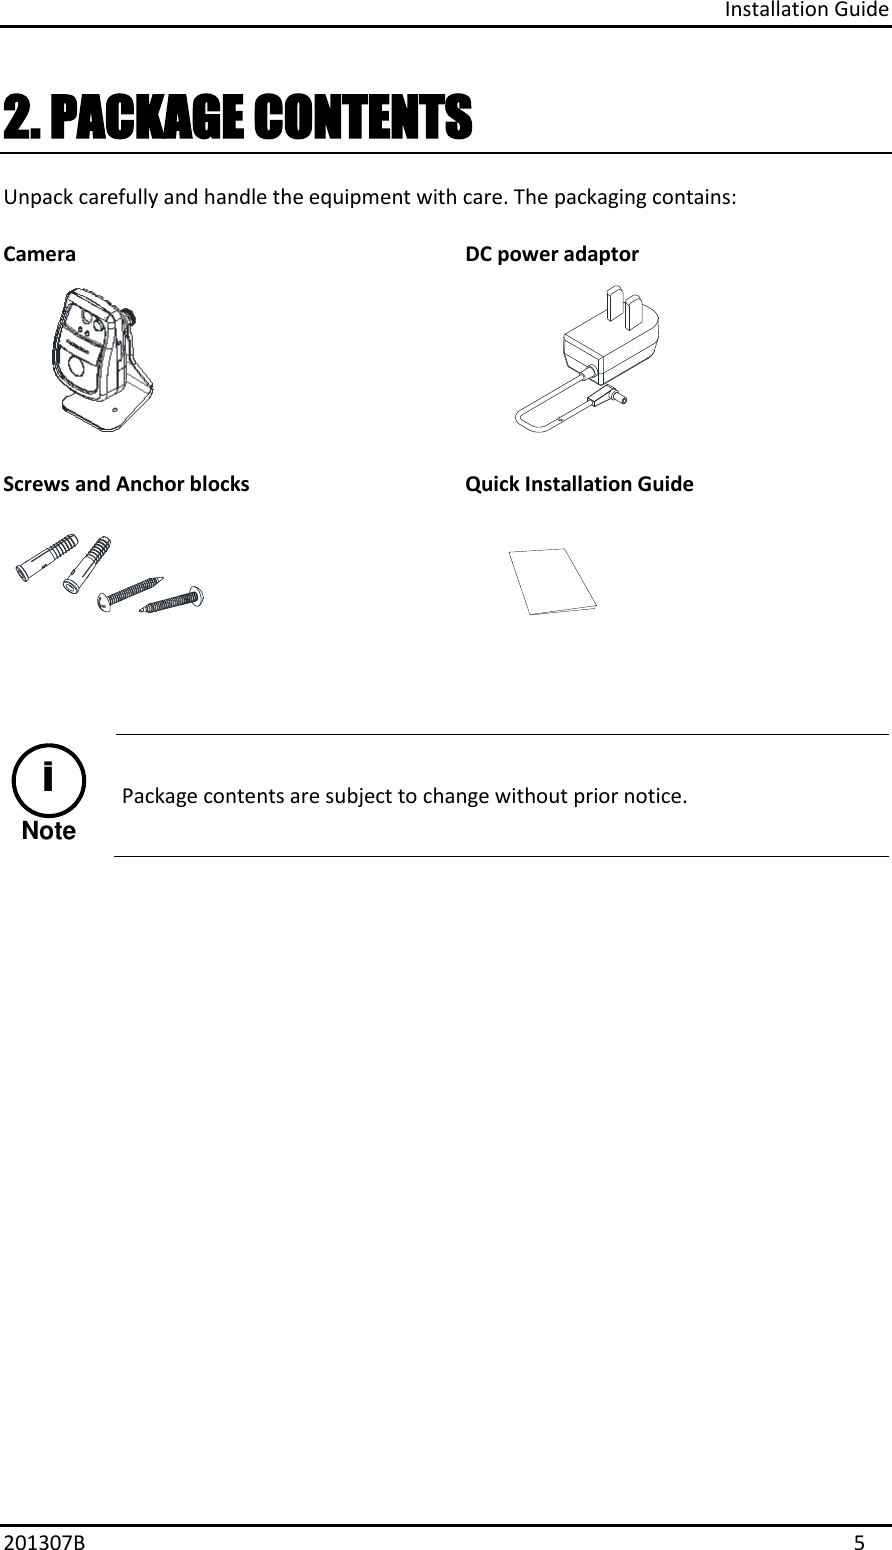 Installation Guide 201307B  5 2. PACKAGE CONTENTSUnpack carefully and handle the equipment with care. The packaging contains: Camera DC power adaptor Screws and Anchor blocks Quick Installation Guide NoteiPackage contents are subject to change without prior notice. 